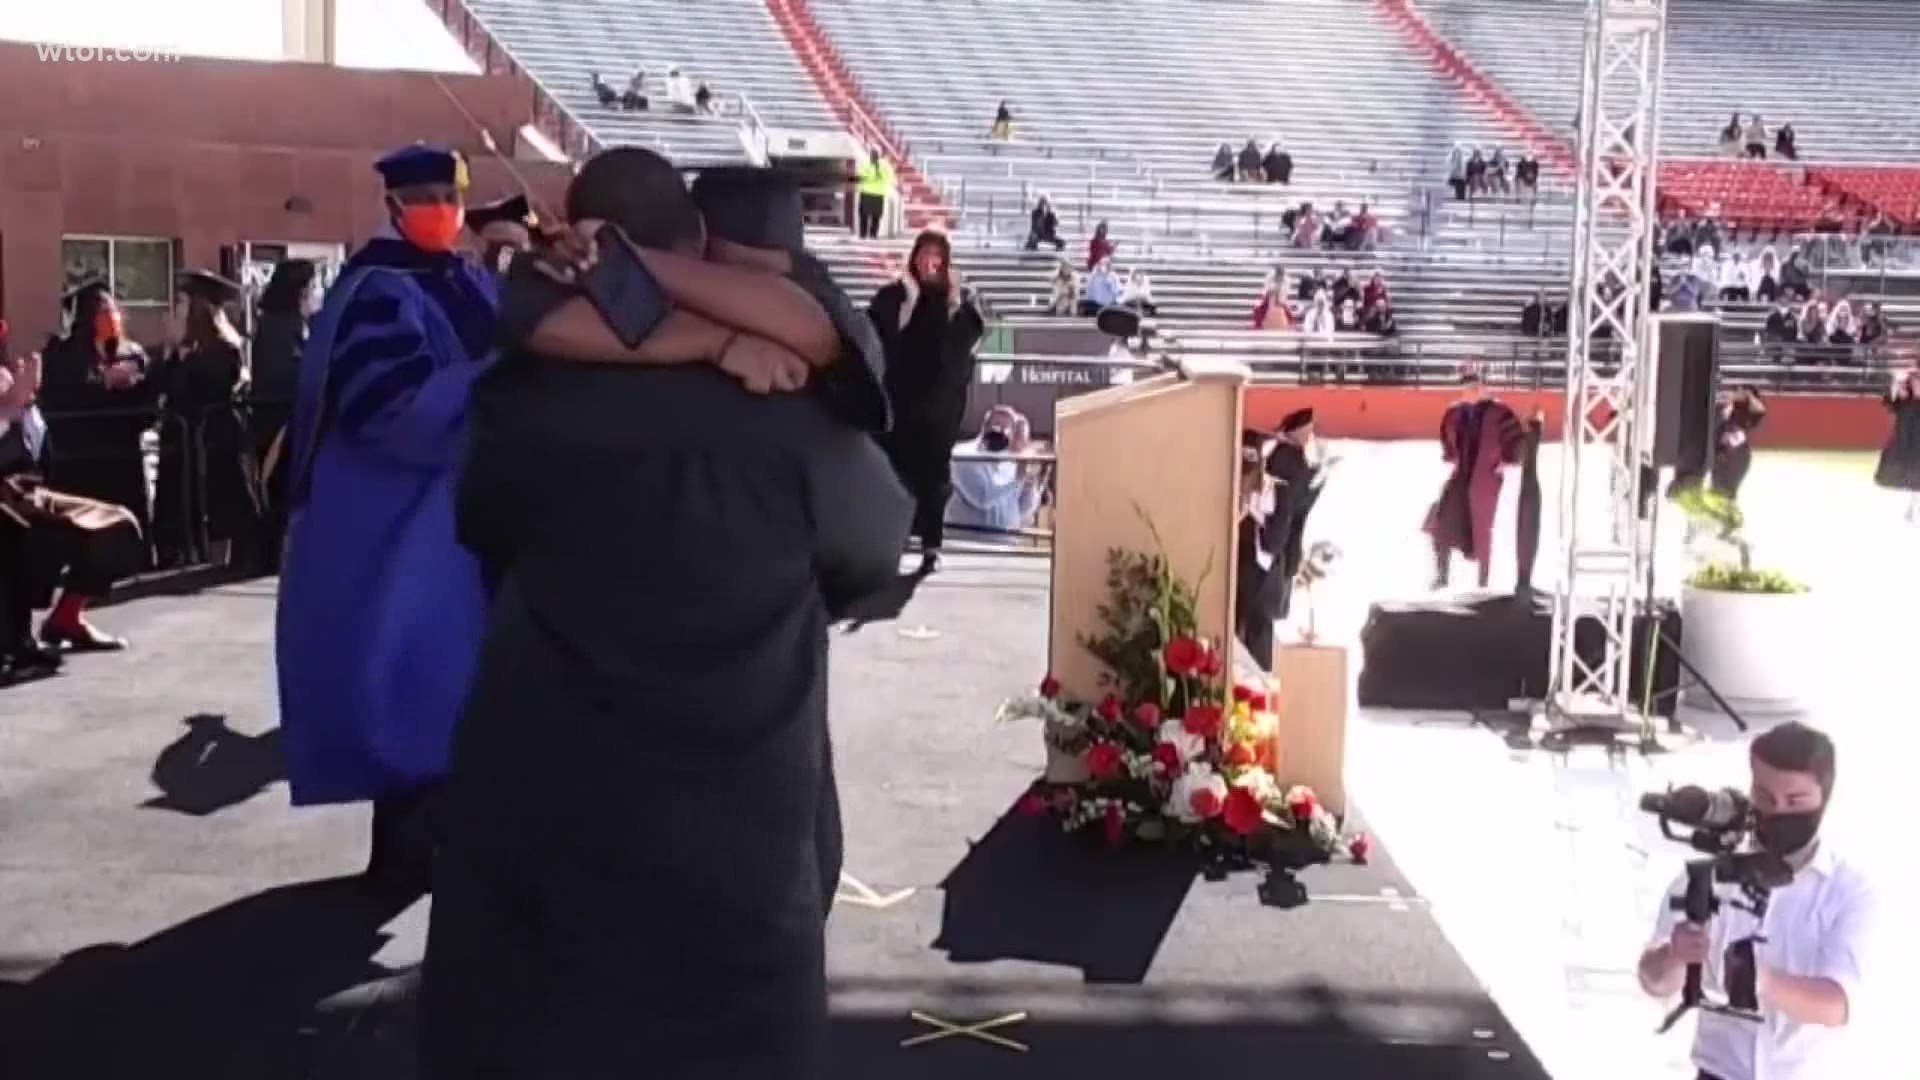 Tatum got to celebrate her graduation with her husband, who surprised her after coming home from Iraq!